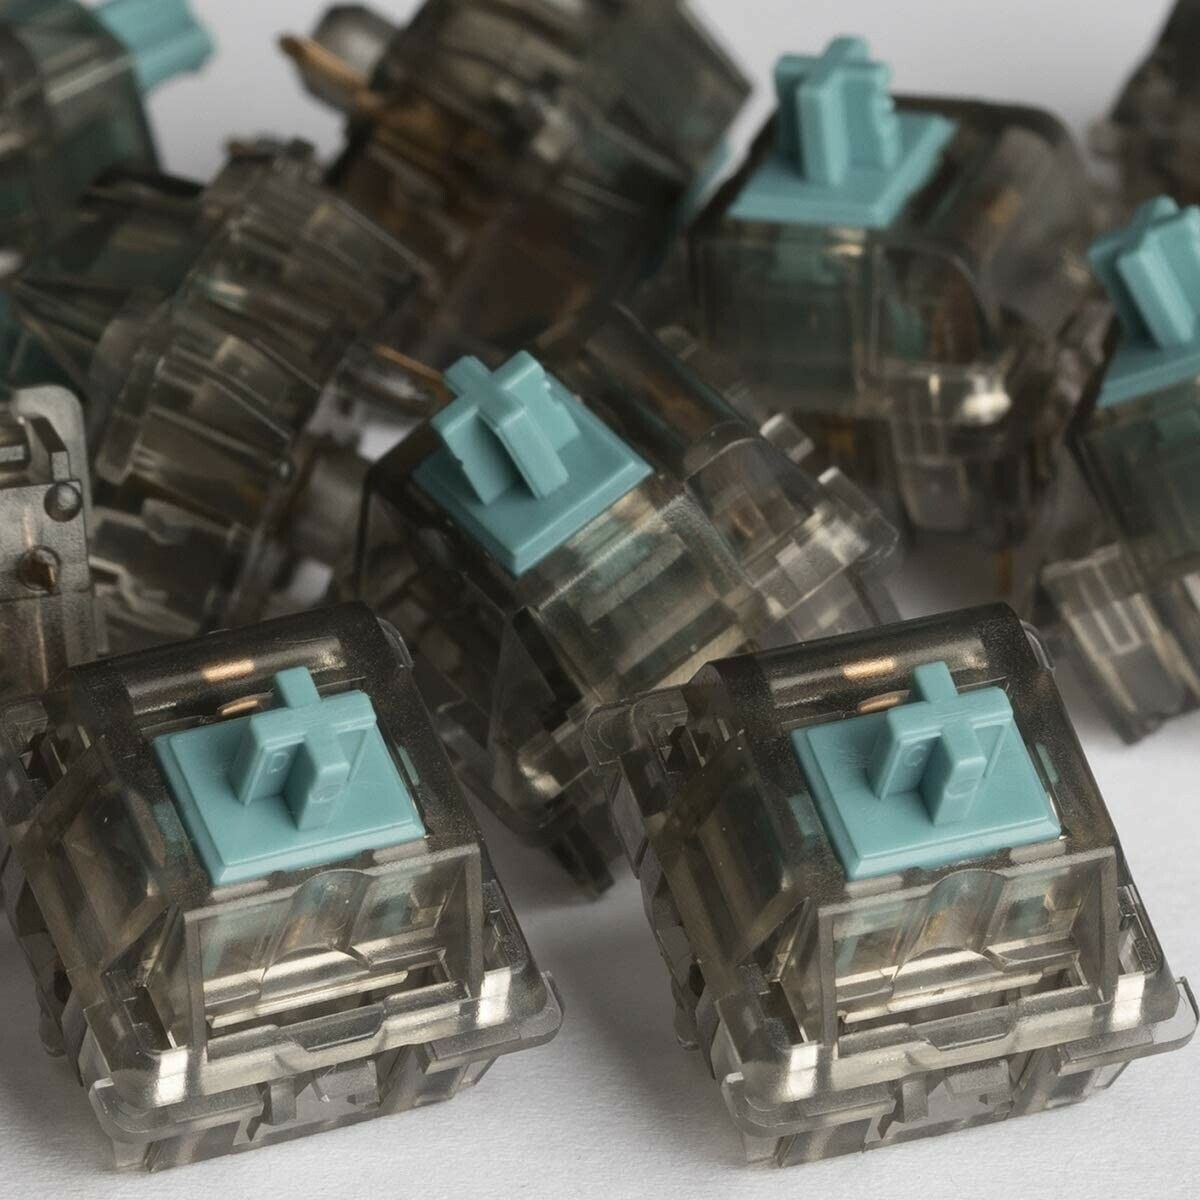 Durock T1 lubed tribosys 3204 and filmed tactile switches (pack of 70)